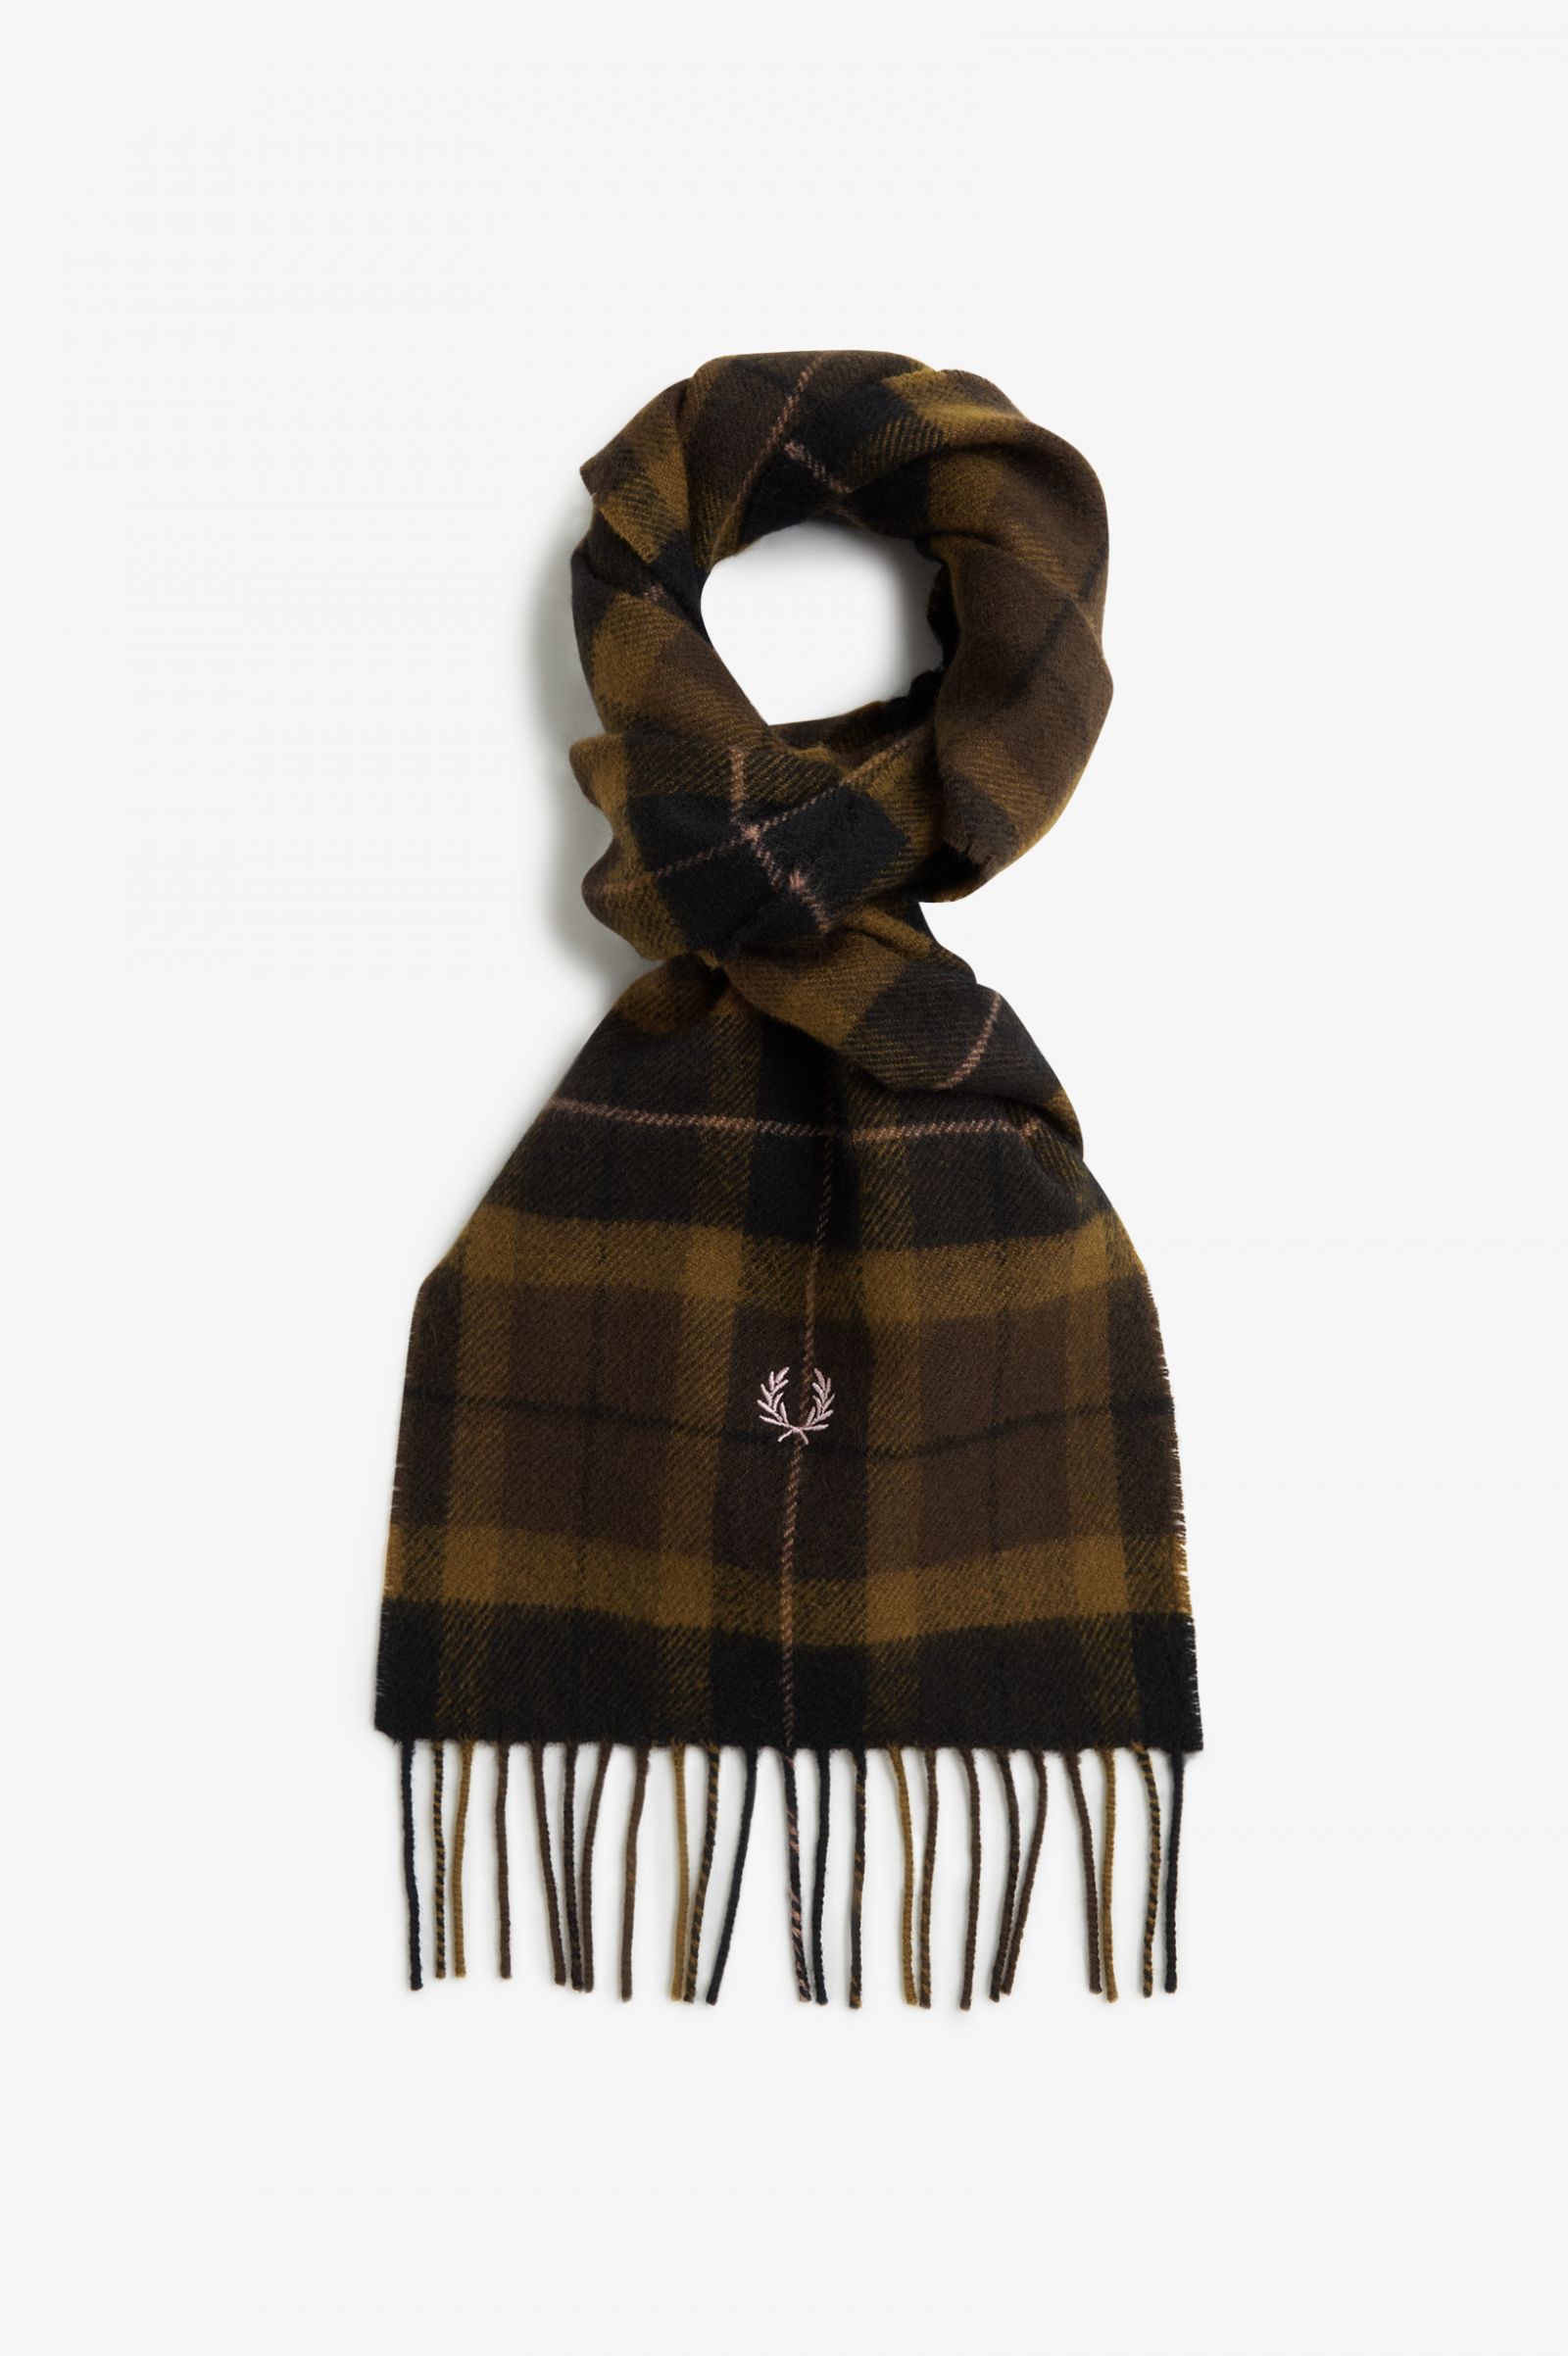 Fred Perry Lambswool Tartan Scarf in Brunt Tobacco